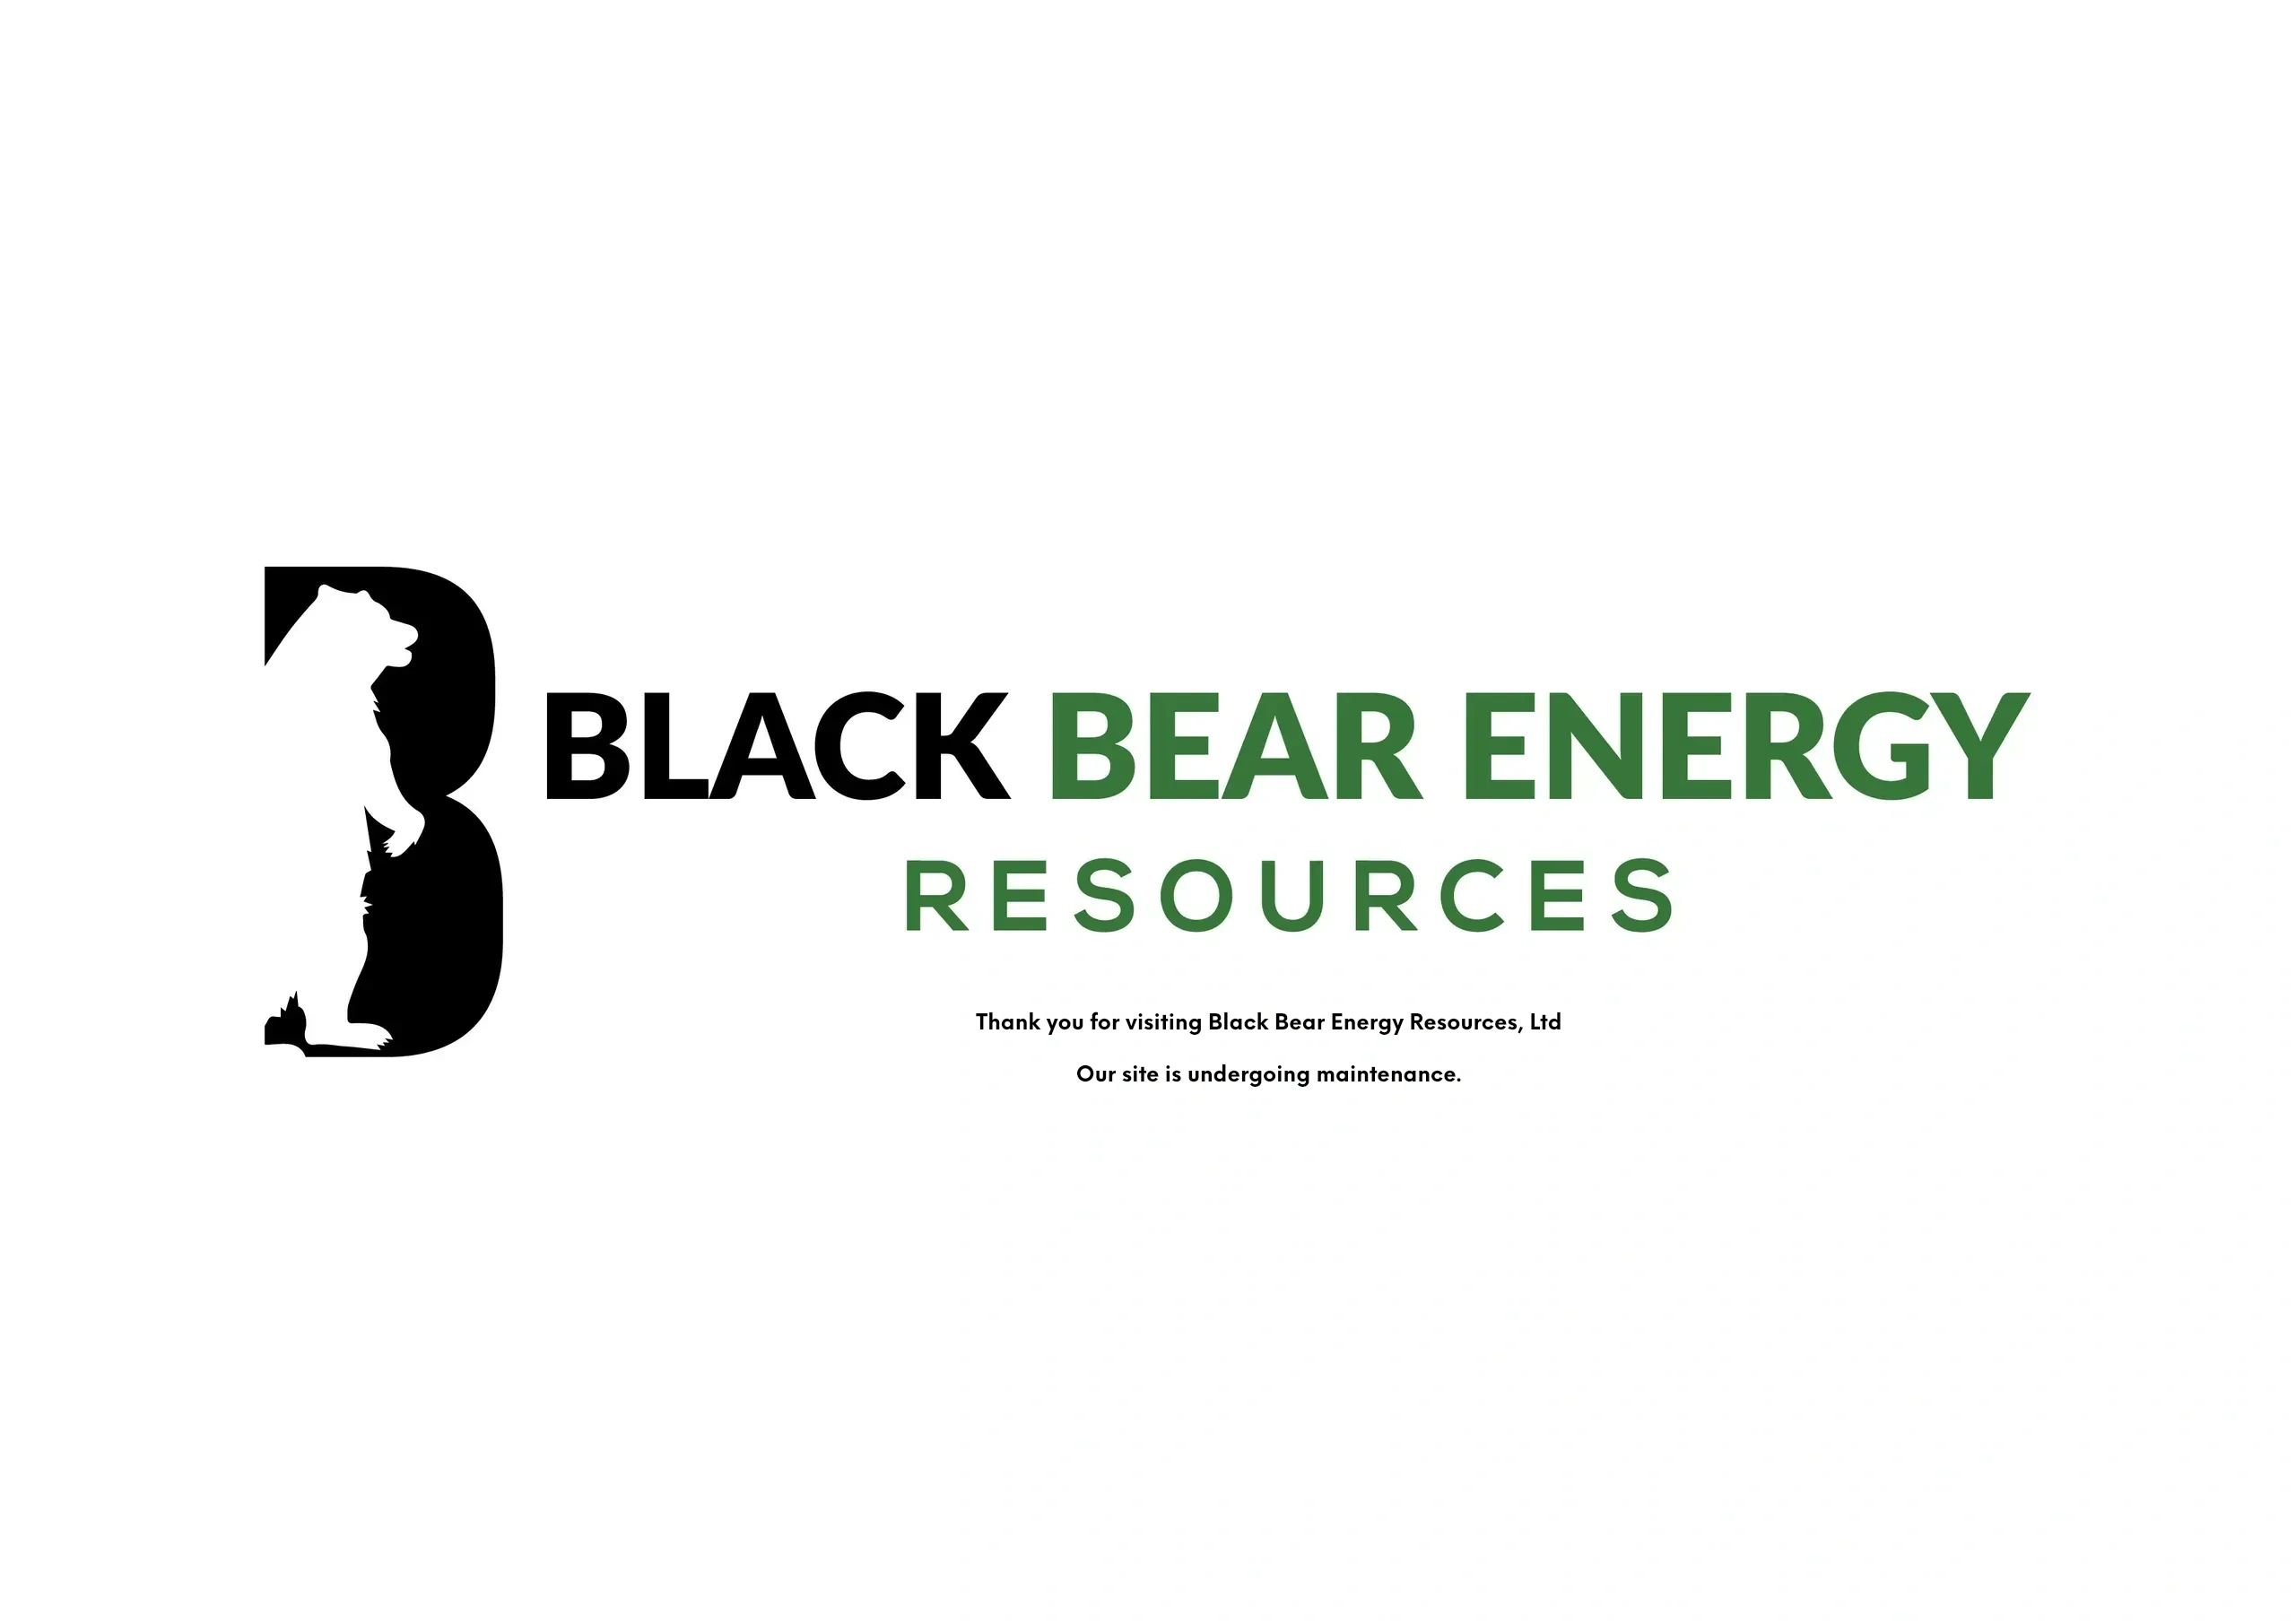 Thank you for visiting Black Bear Energy Resources, Ltd. Our site is presently under maintenance.